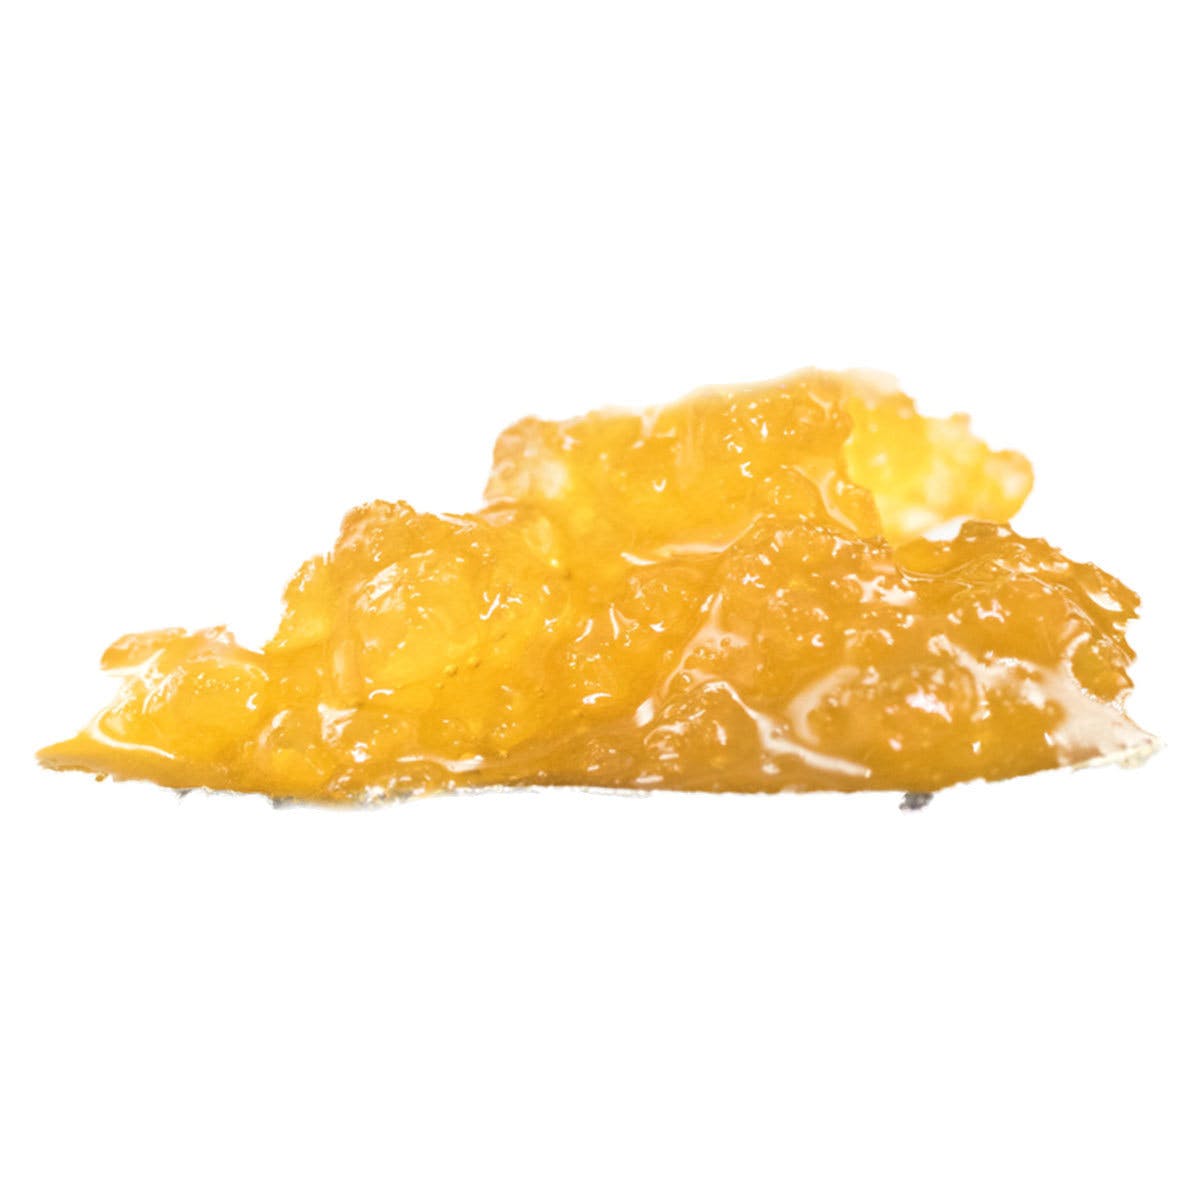 concentrate-craft-concentrates-craft-panacea-jack-frost-live-resin